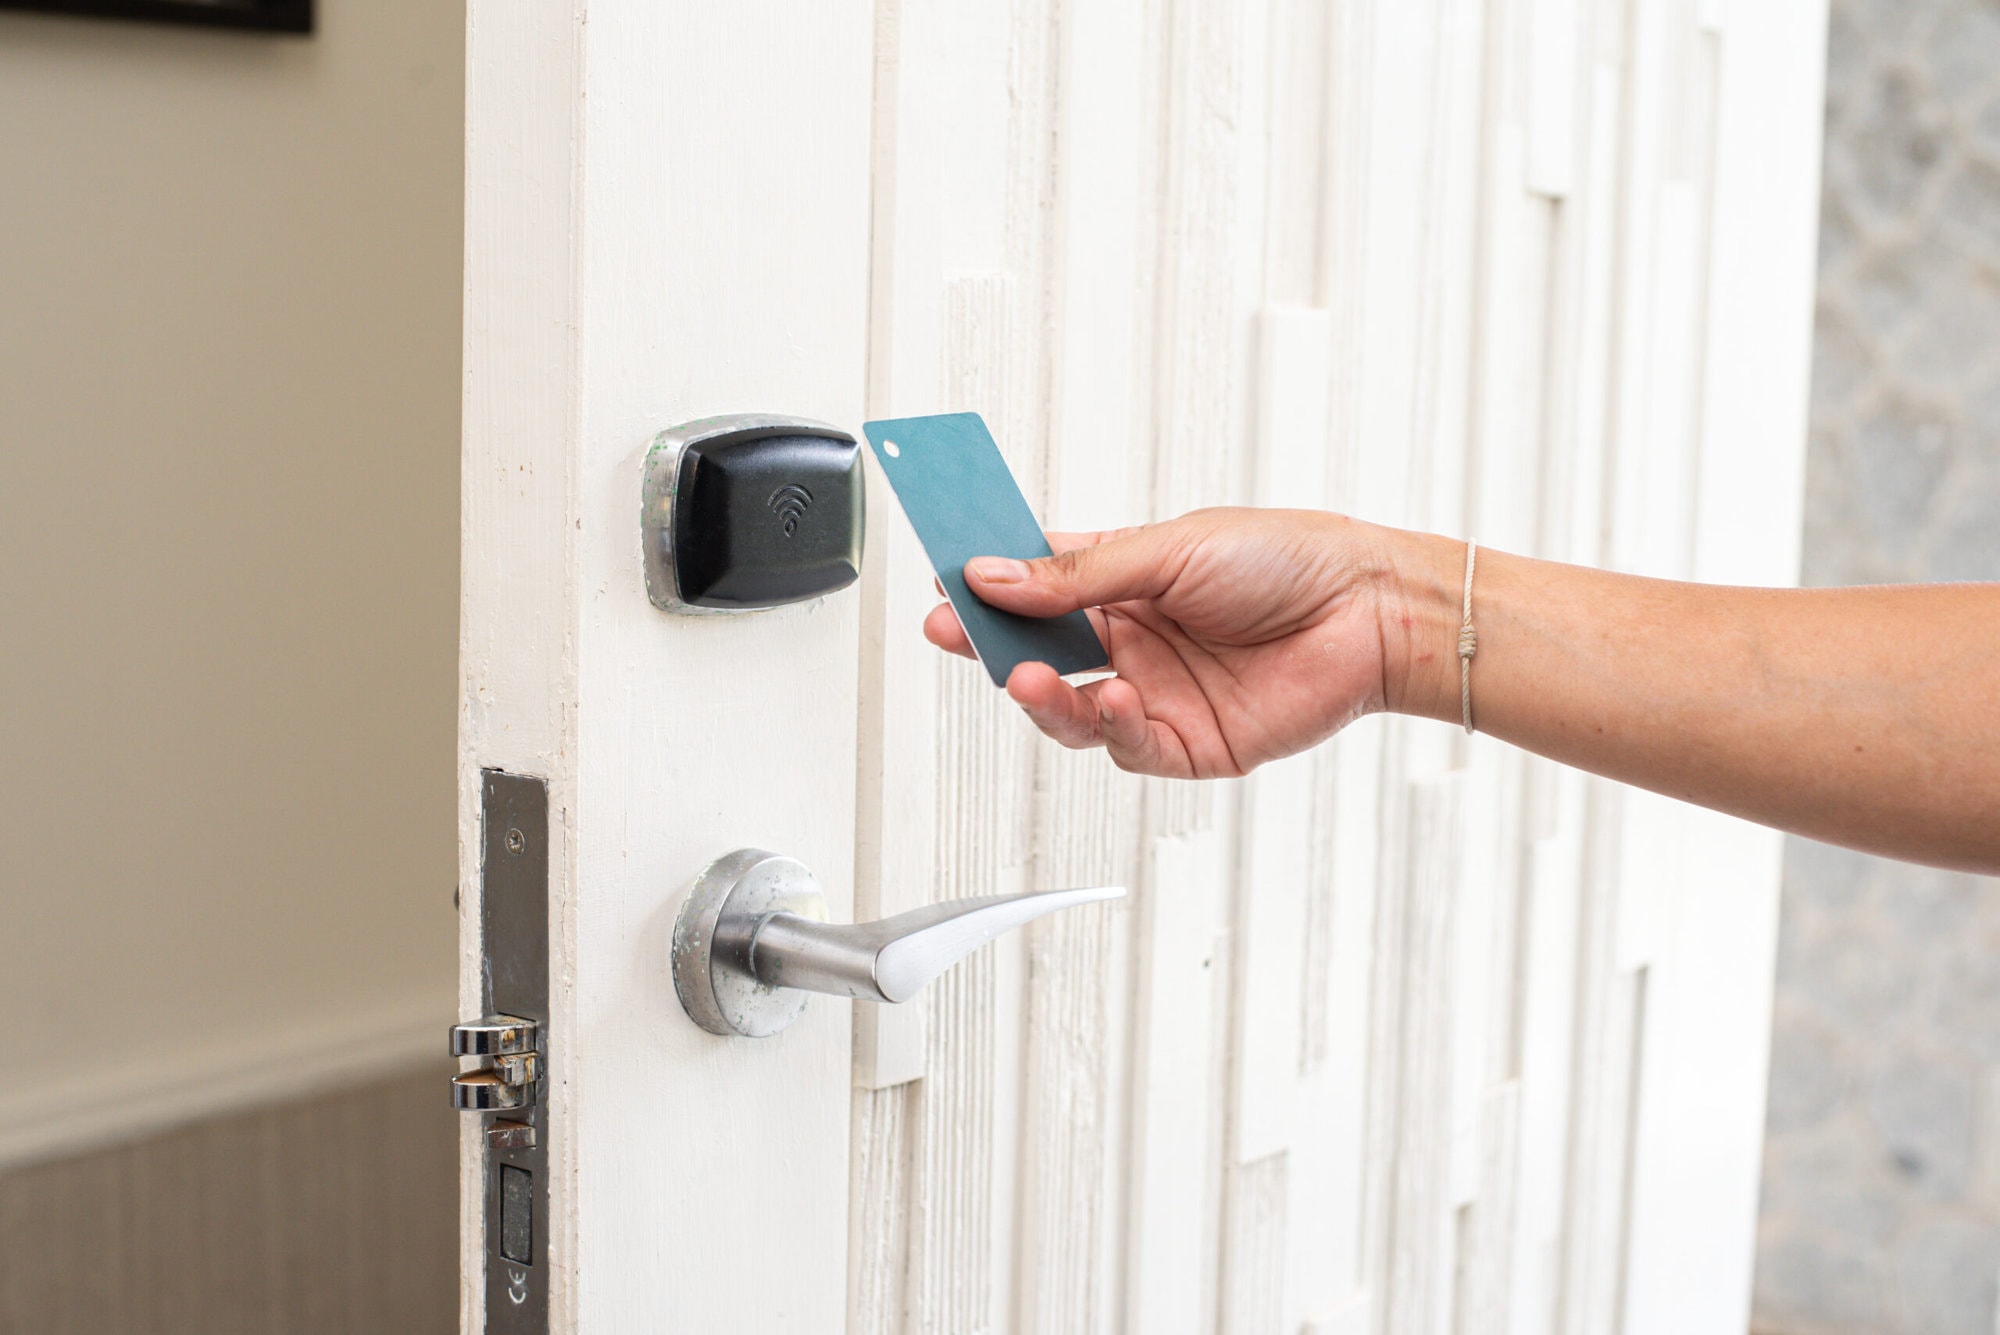 Should you go for smart locks or traditional locks? - Lockout 24/7